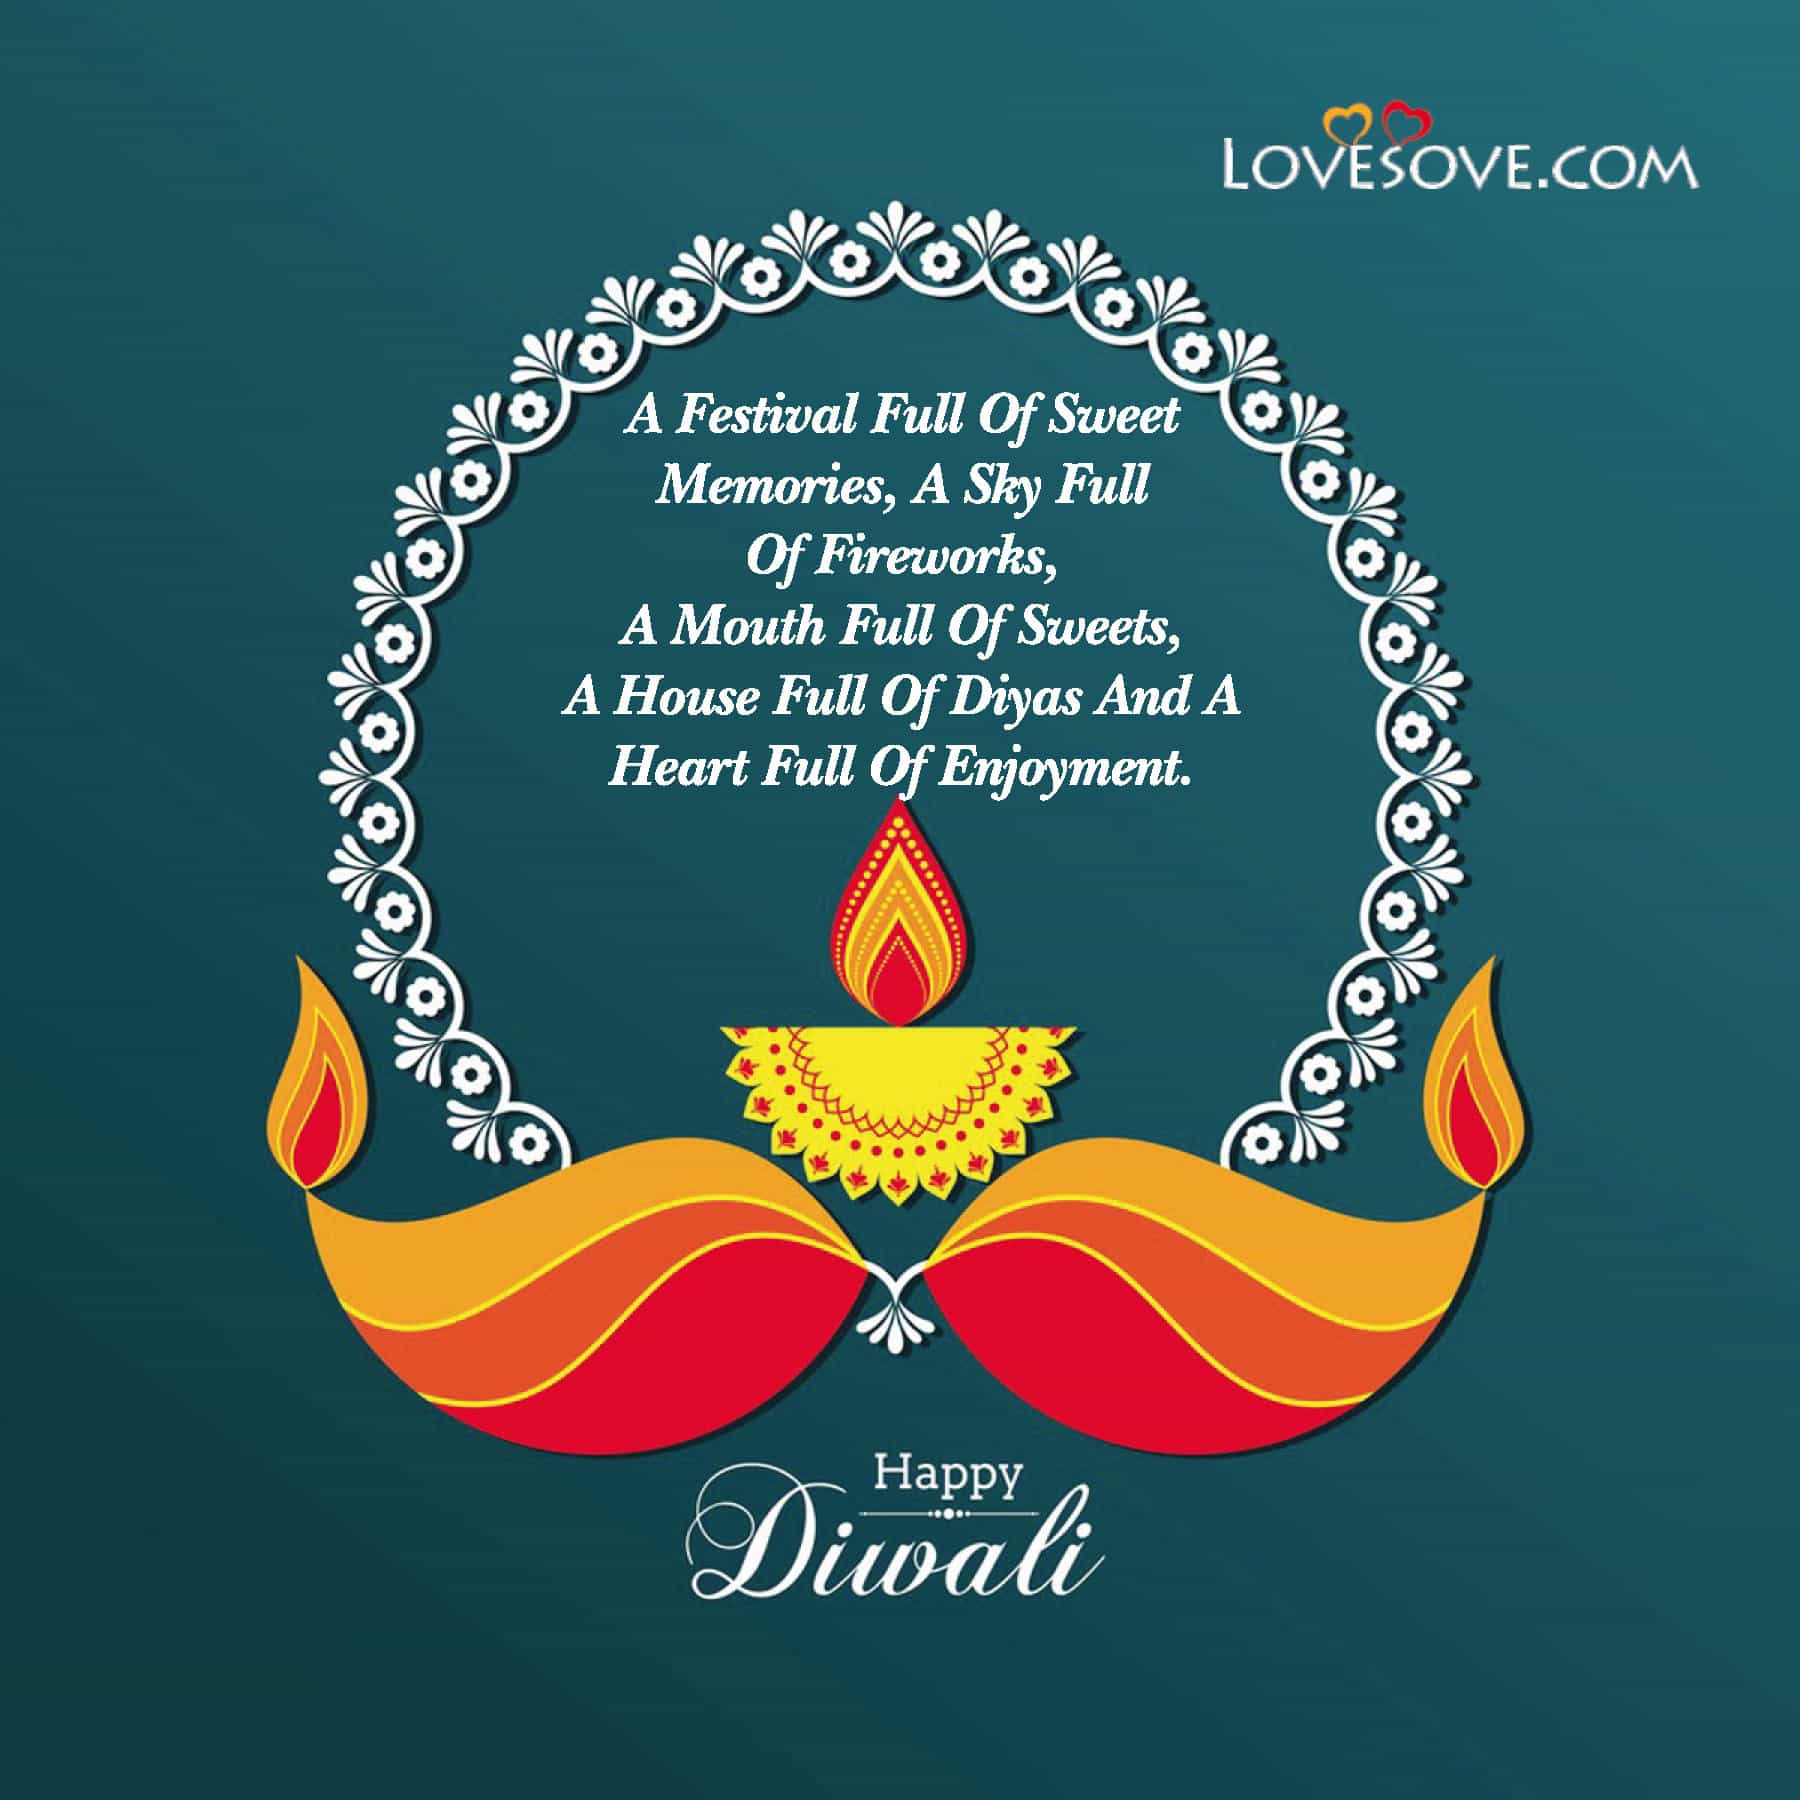 Happy Diwali Quotes And Sayings, Happy Diwali Images With Beautiful Quotes, Happy Diwali Awesome Quotes, Happy Diwali Positive Quotes, Happy Diwali Hindi Quotes Images,